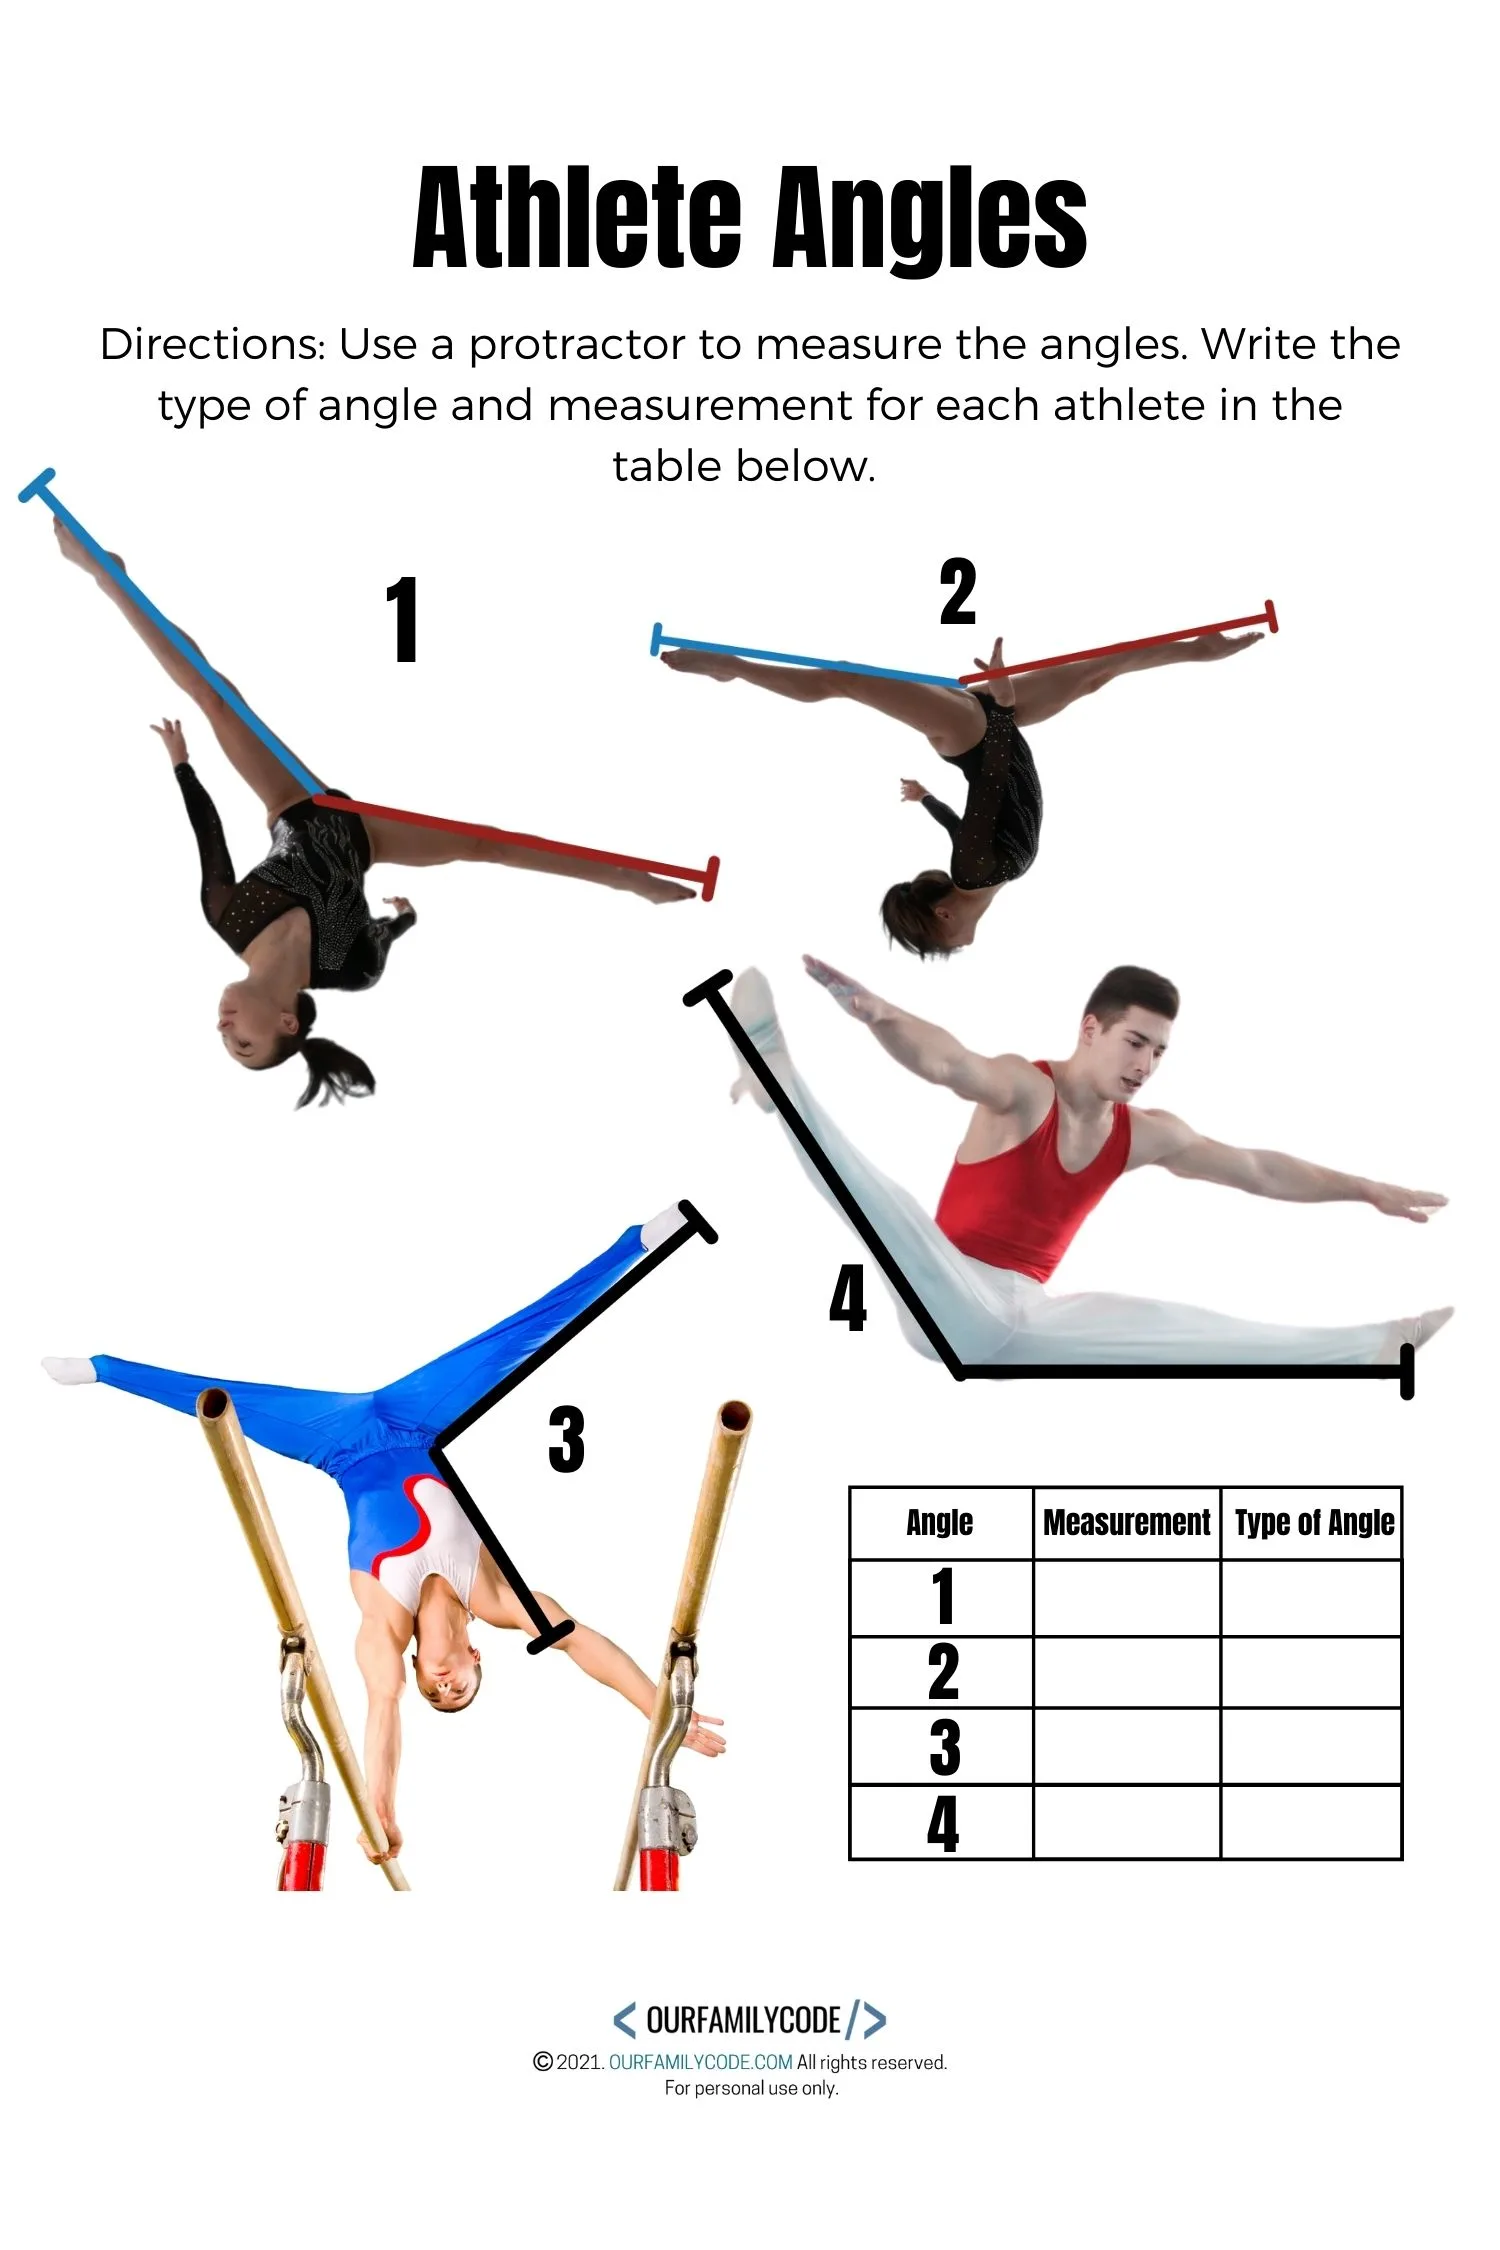 A picture of an athlete angle measurement worksheet to measure angles and identify types of angles used in gymnastics.